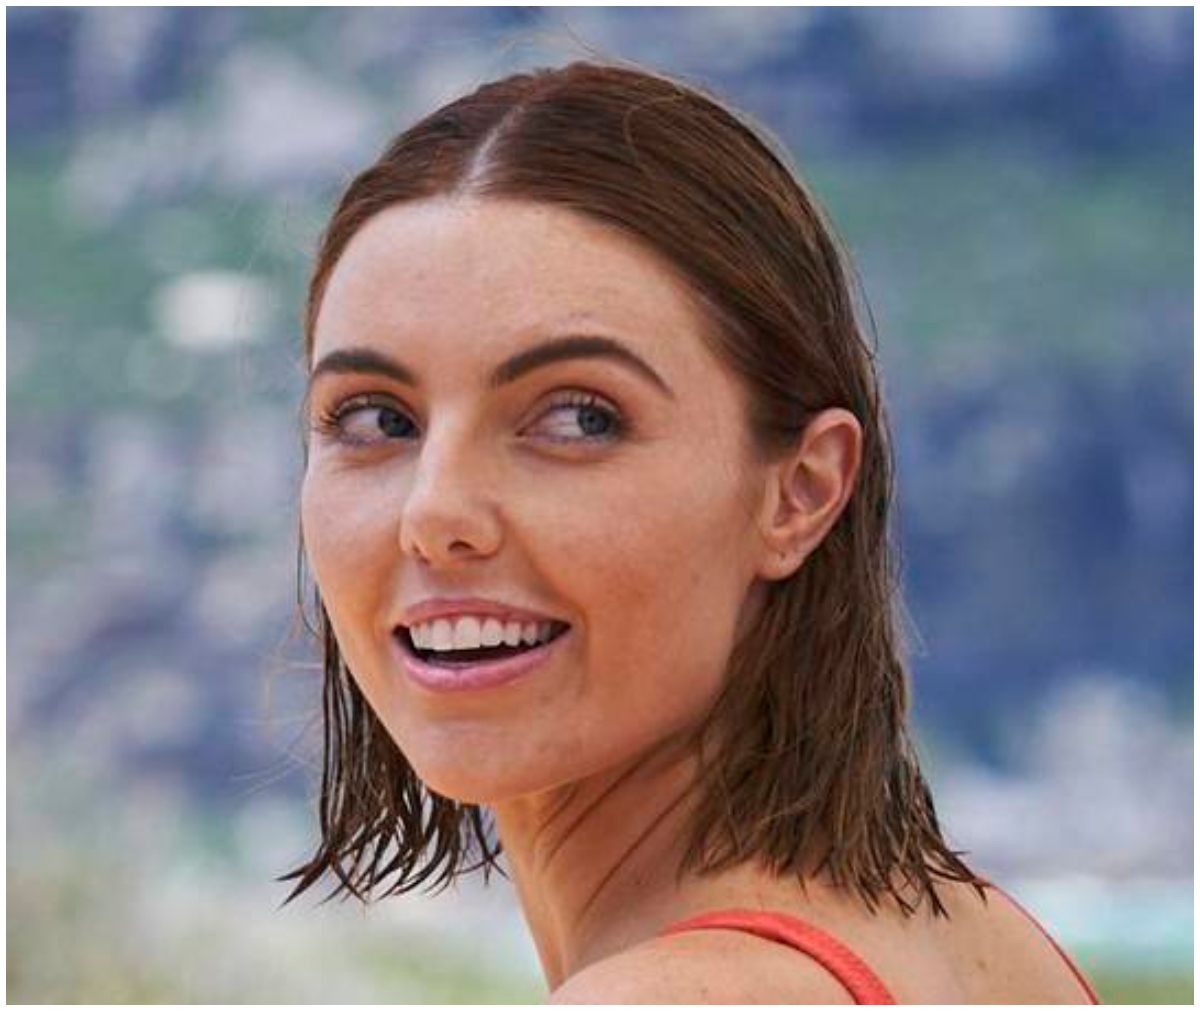 “He’s just a boss and so charismatic”: Home and Away’s newest actress Maddy Jevic grew up watching the show – but one actor took her completely by surprise